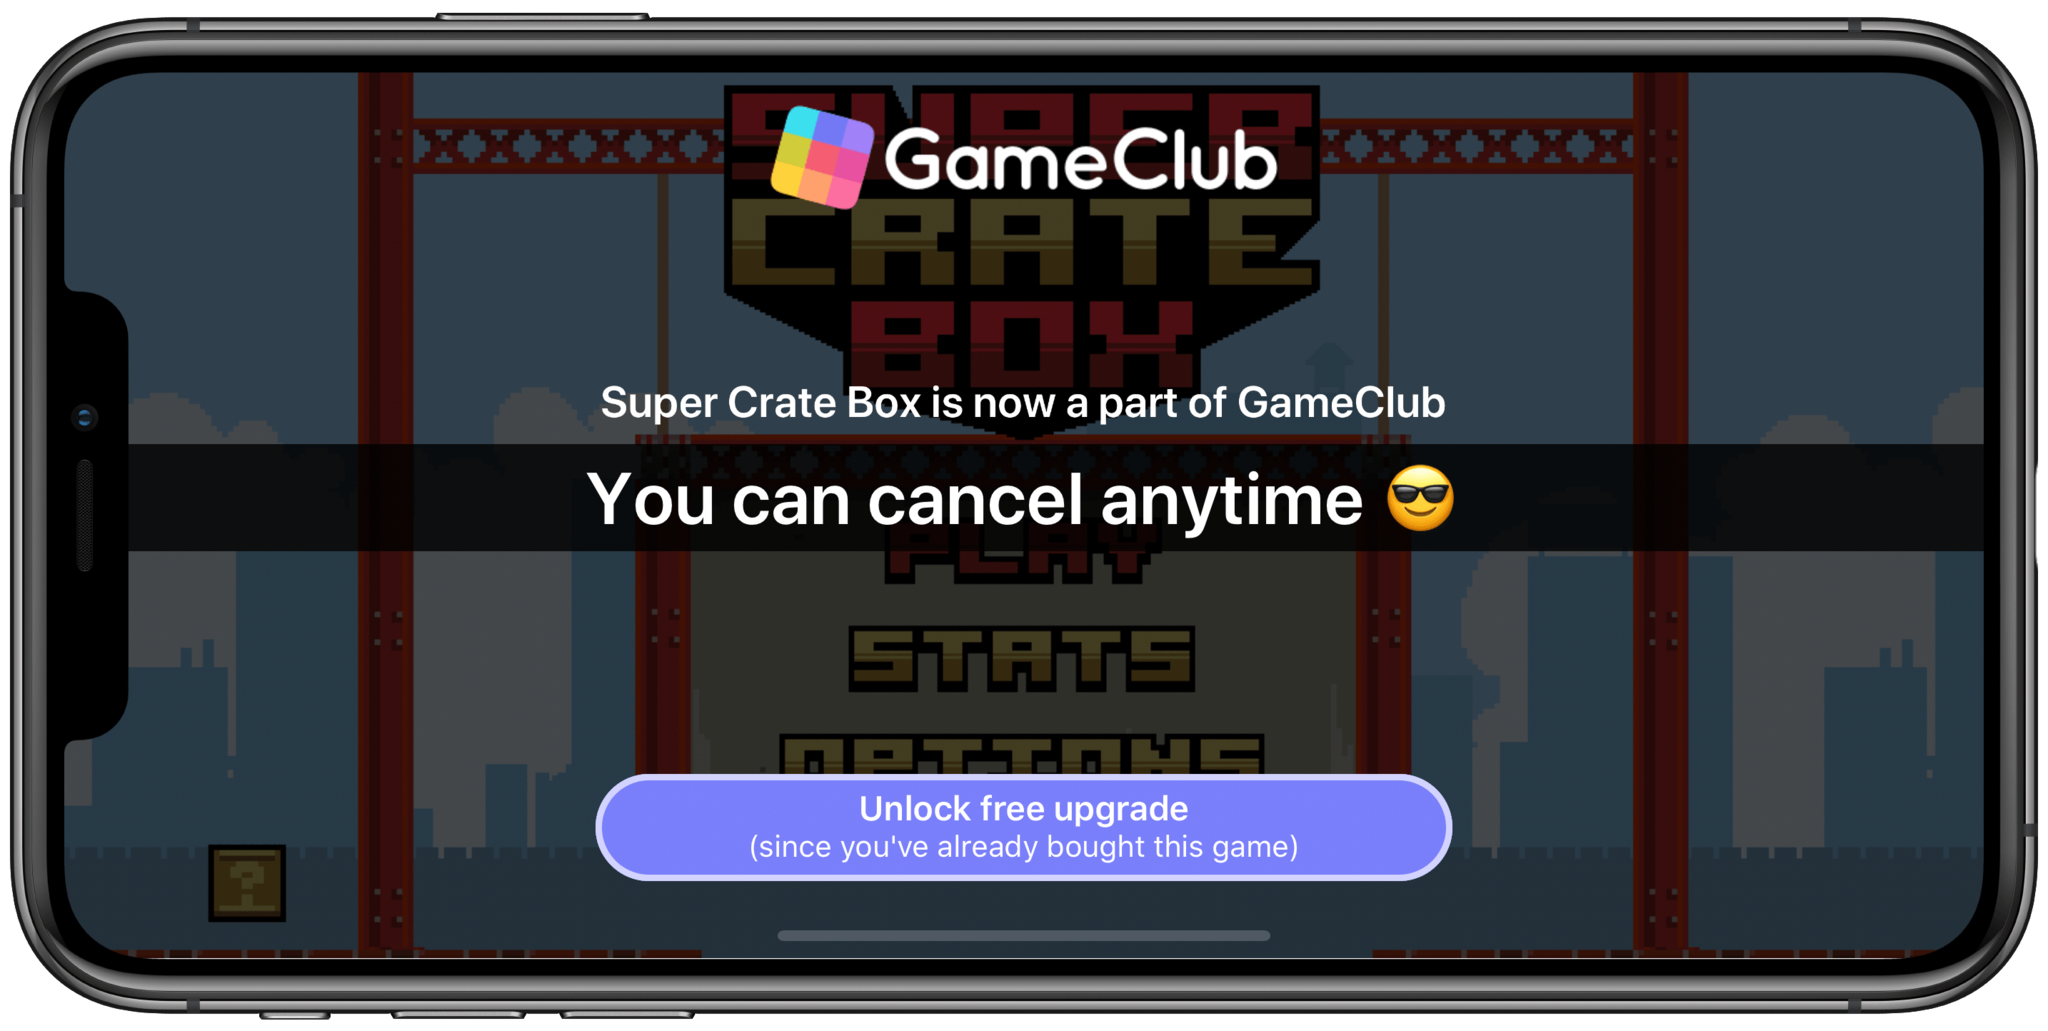 Restore purchase in Super Crate Box with GameClub